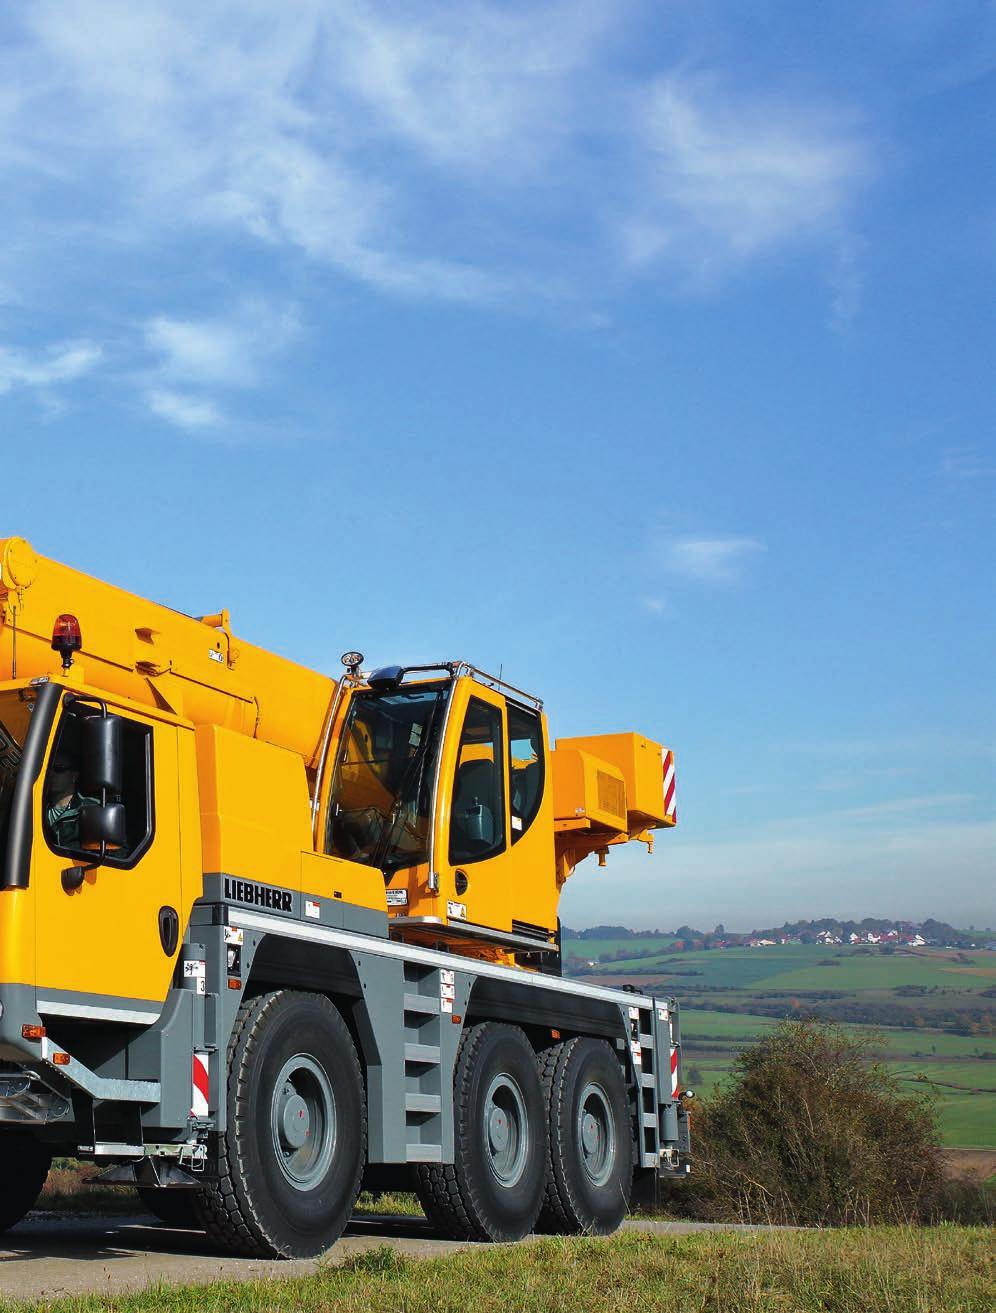 The Liebherr LTM 1050-3.1 mobile crane is characterised by its long telescopic boom, strong lifting capacities, exceptional mobility and comprehensive comfort and safety equipment.